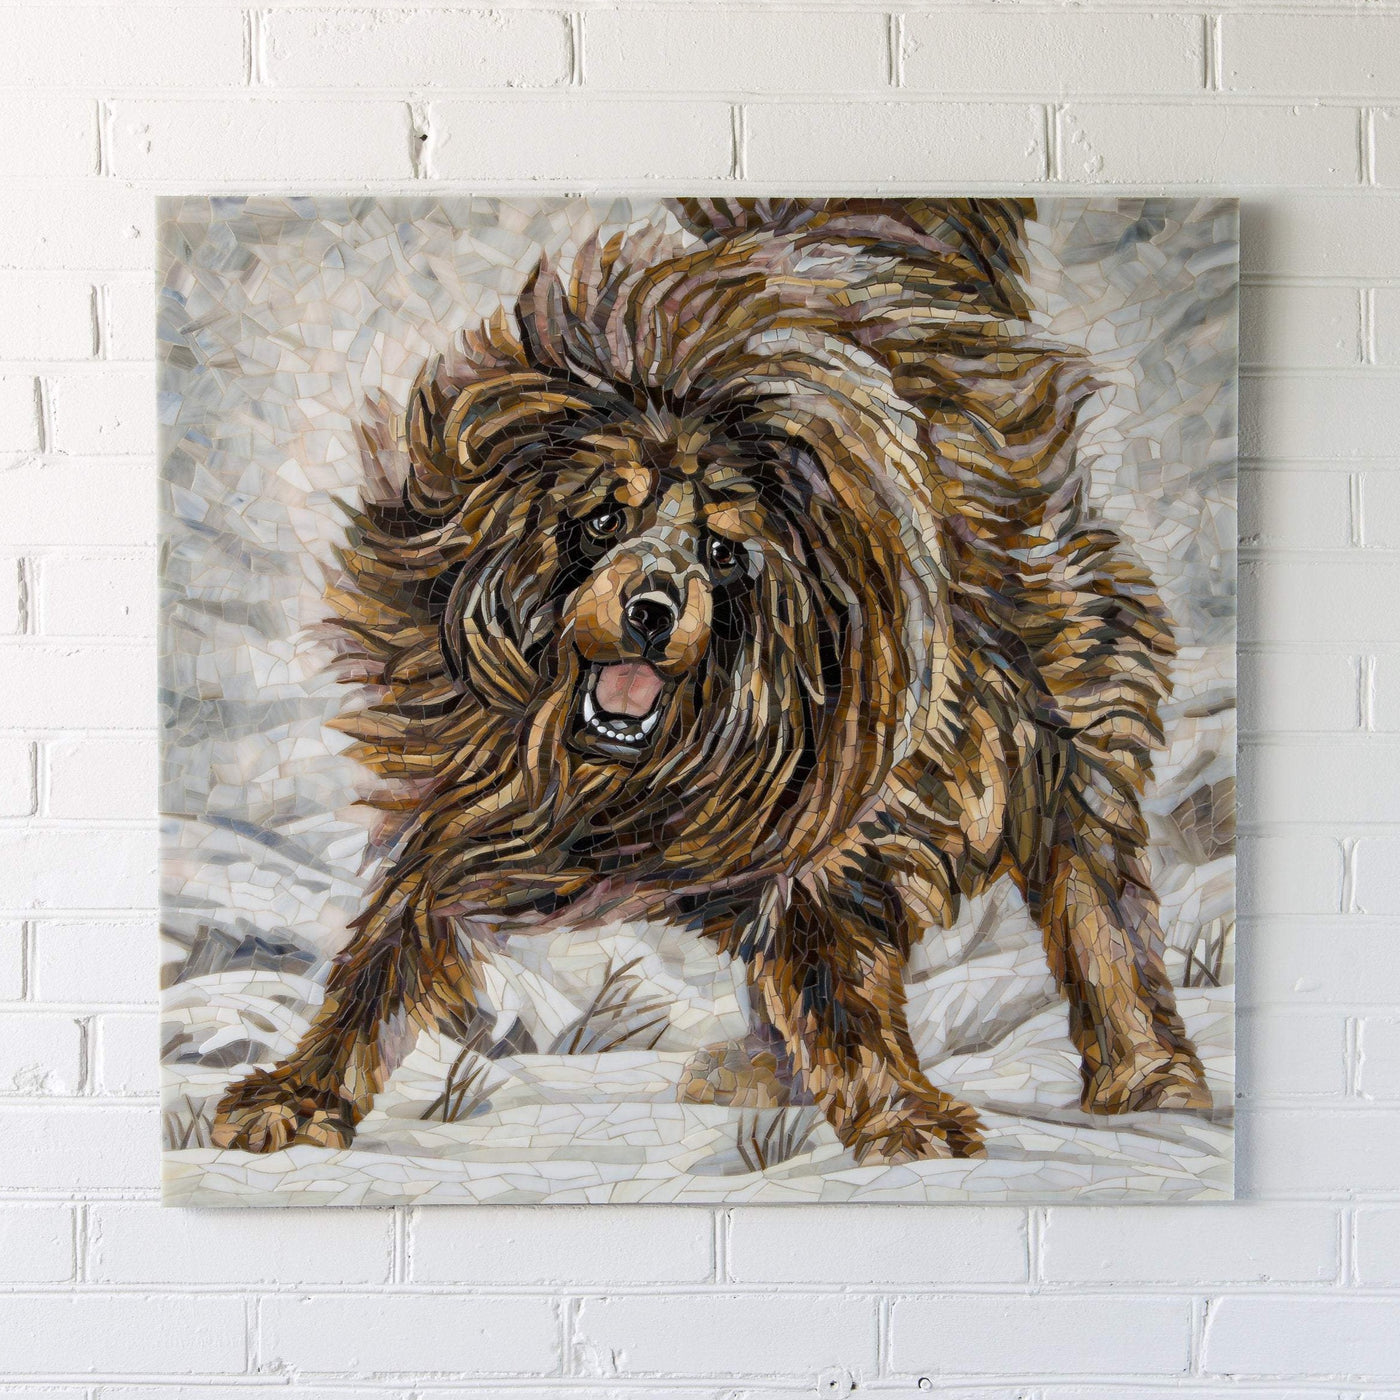 Stained glass mosaic depicting running Tibetan Mastiff for home decor